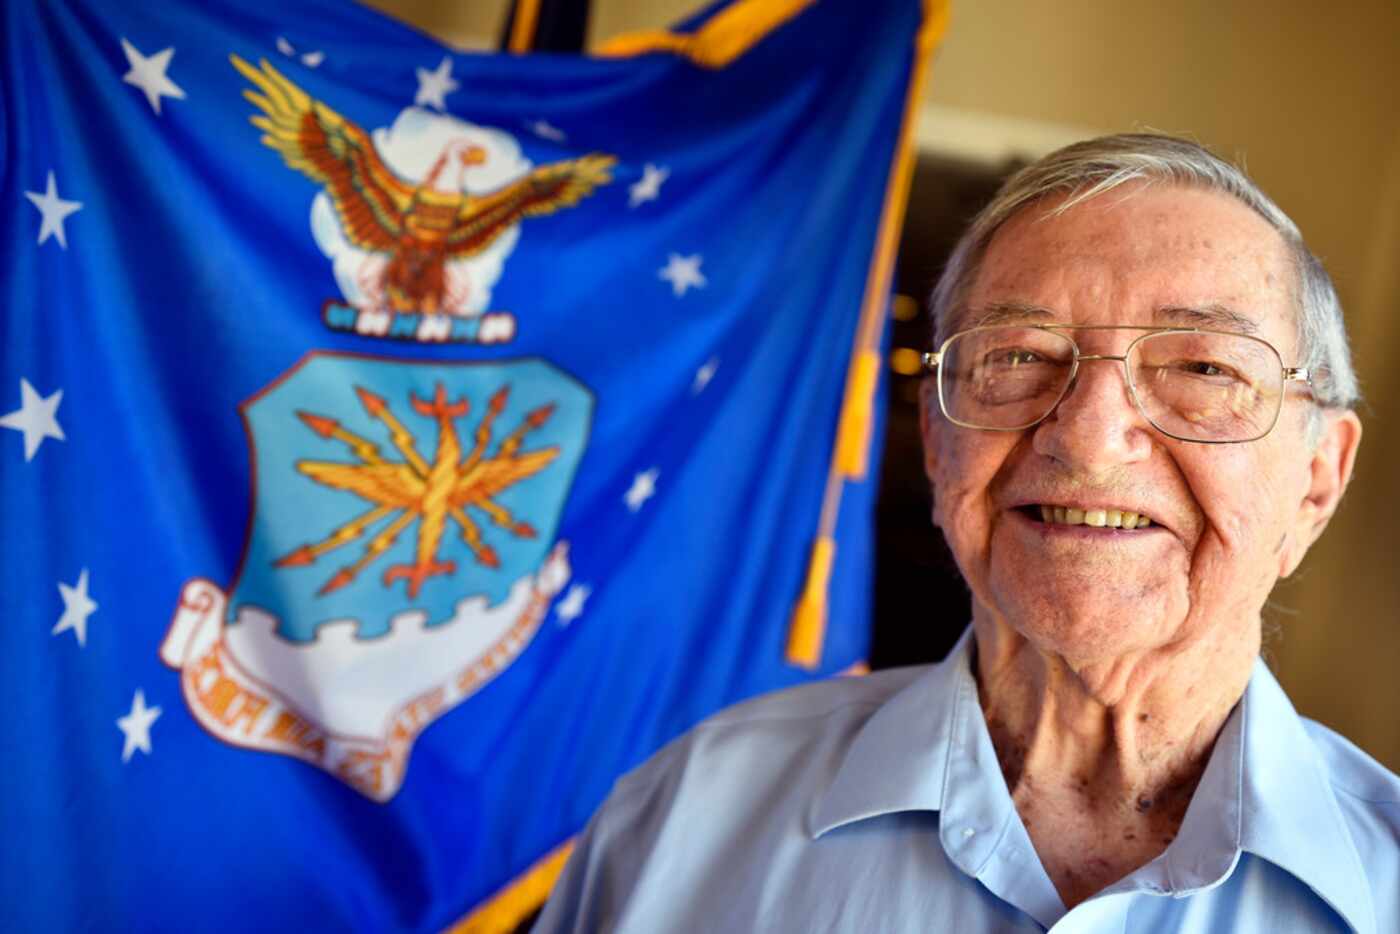 Air Force veteran Jorge Masek, 87, photographed with the Air Force flag at the Treemont...